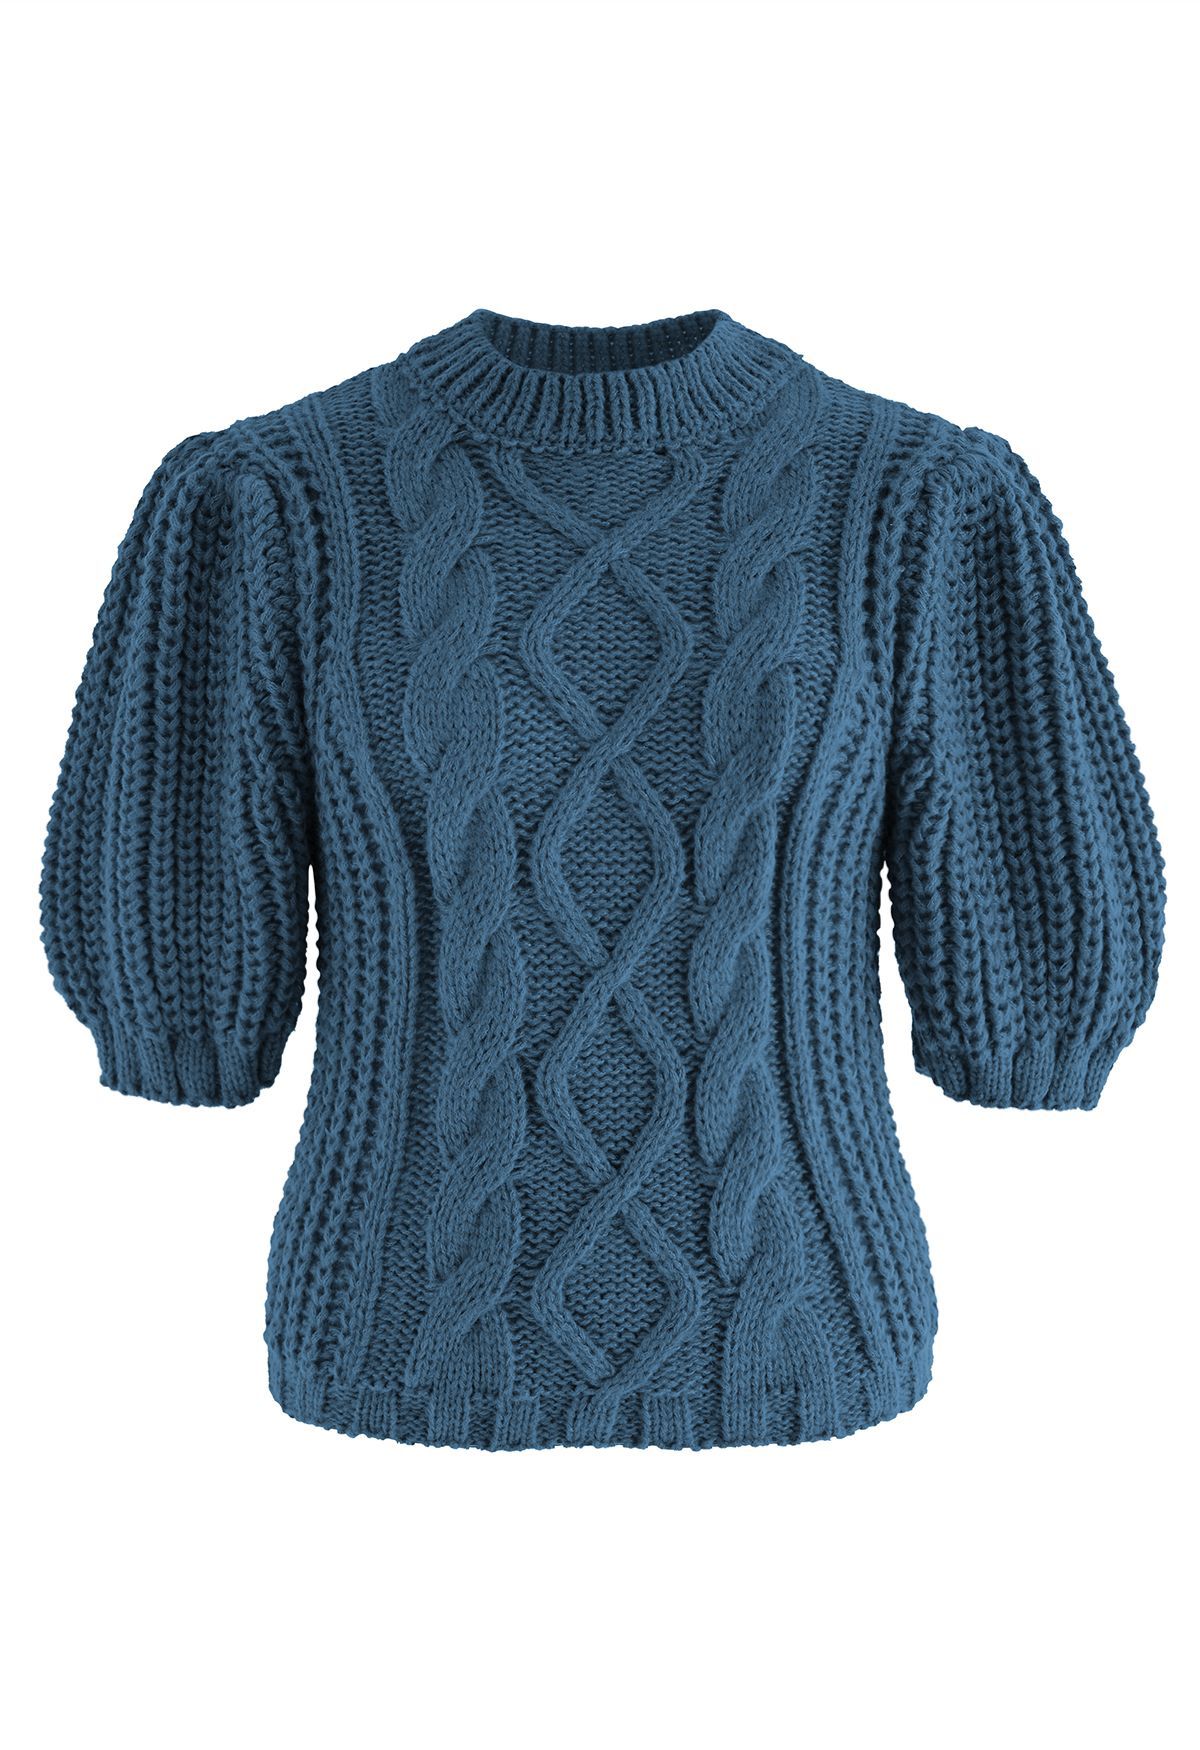 Bubble Sleeve Braided Ribbed Sweater in Indigo | Chicwish